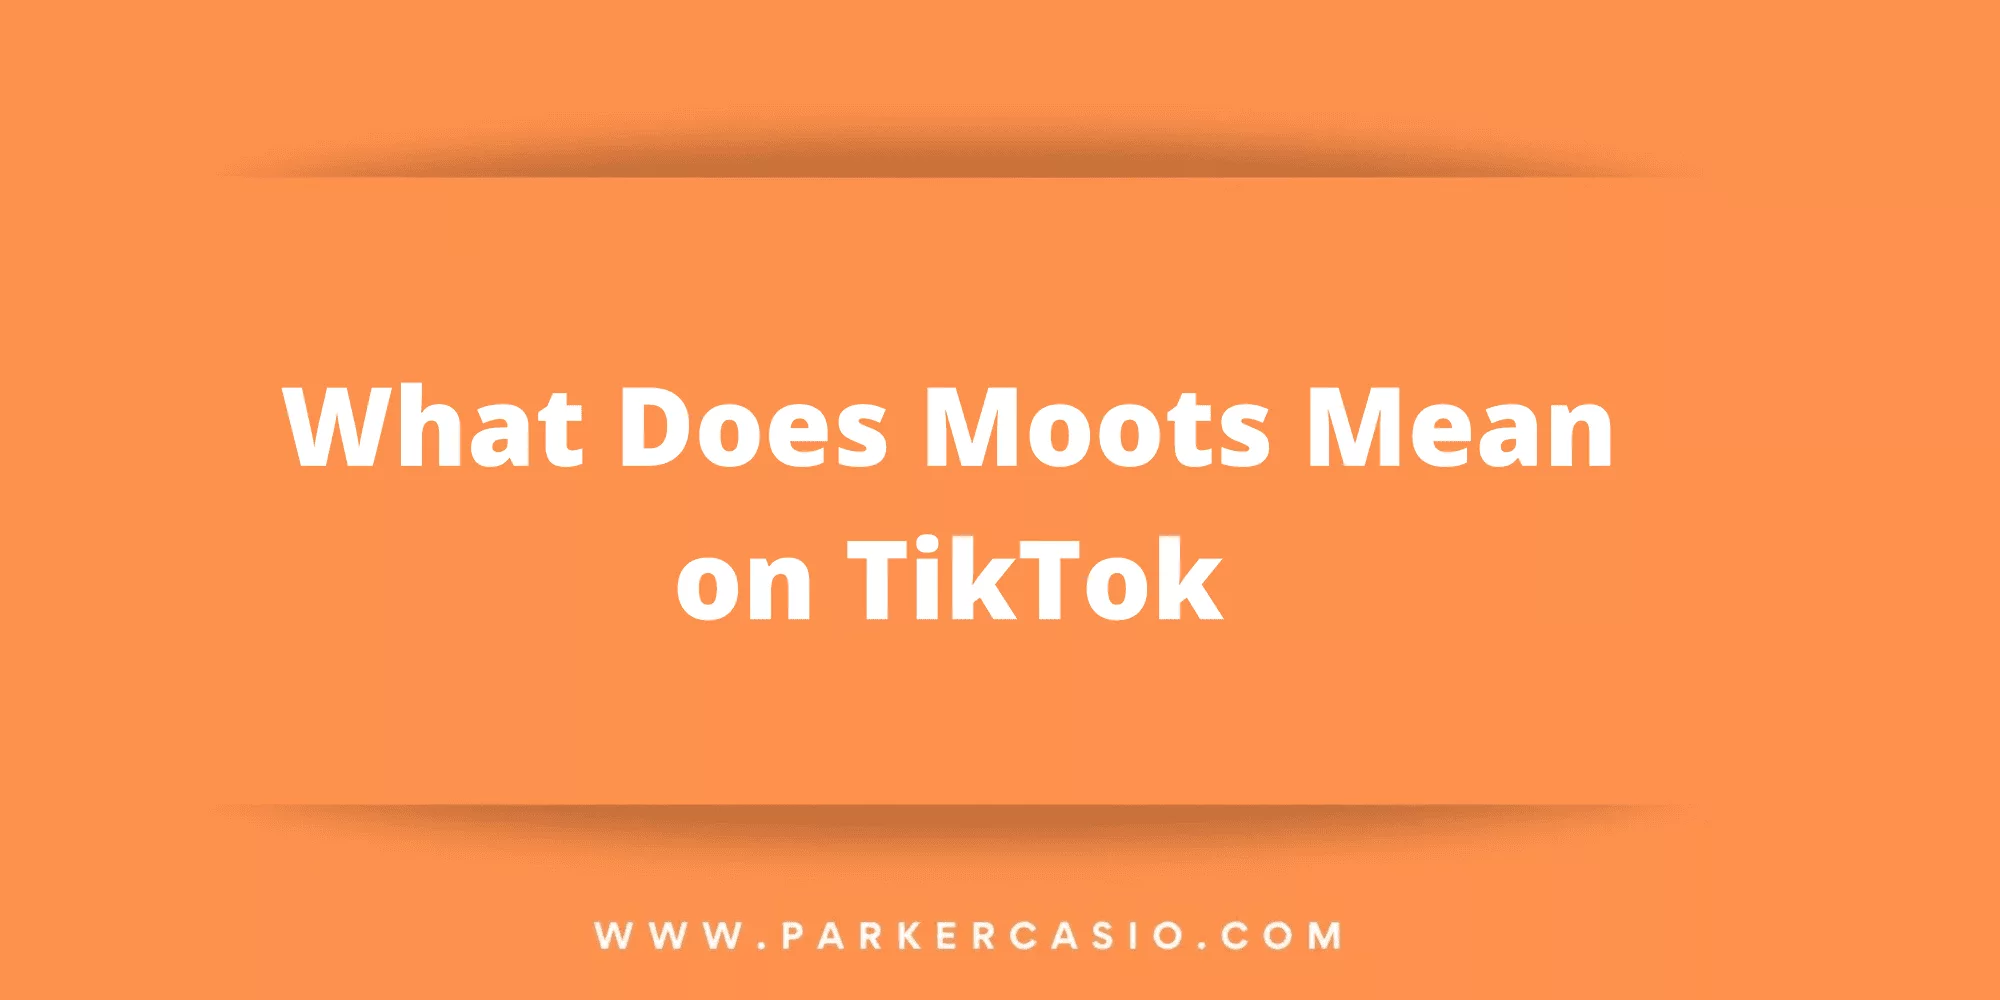 What Does Moots Mean on TikTok